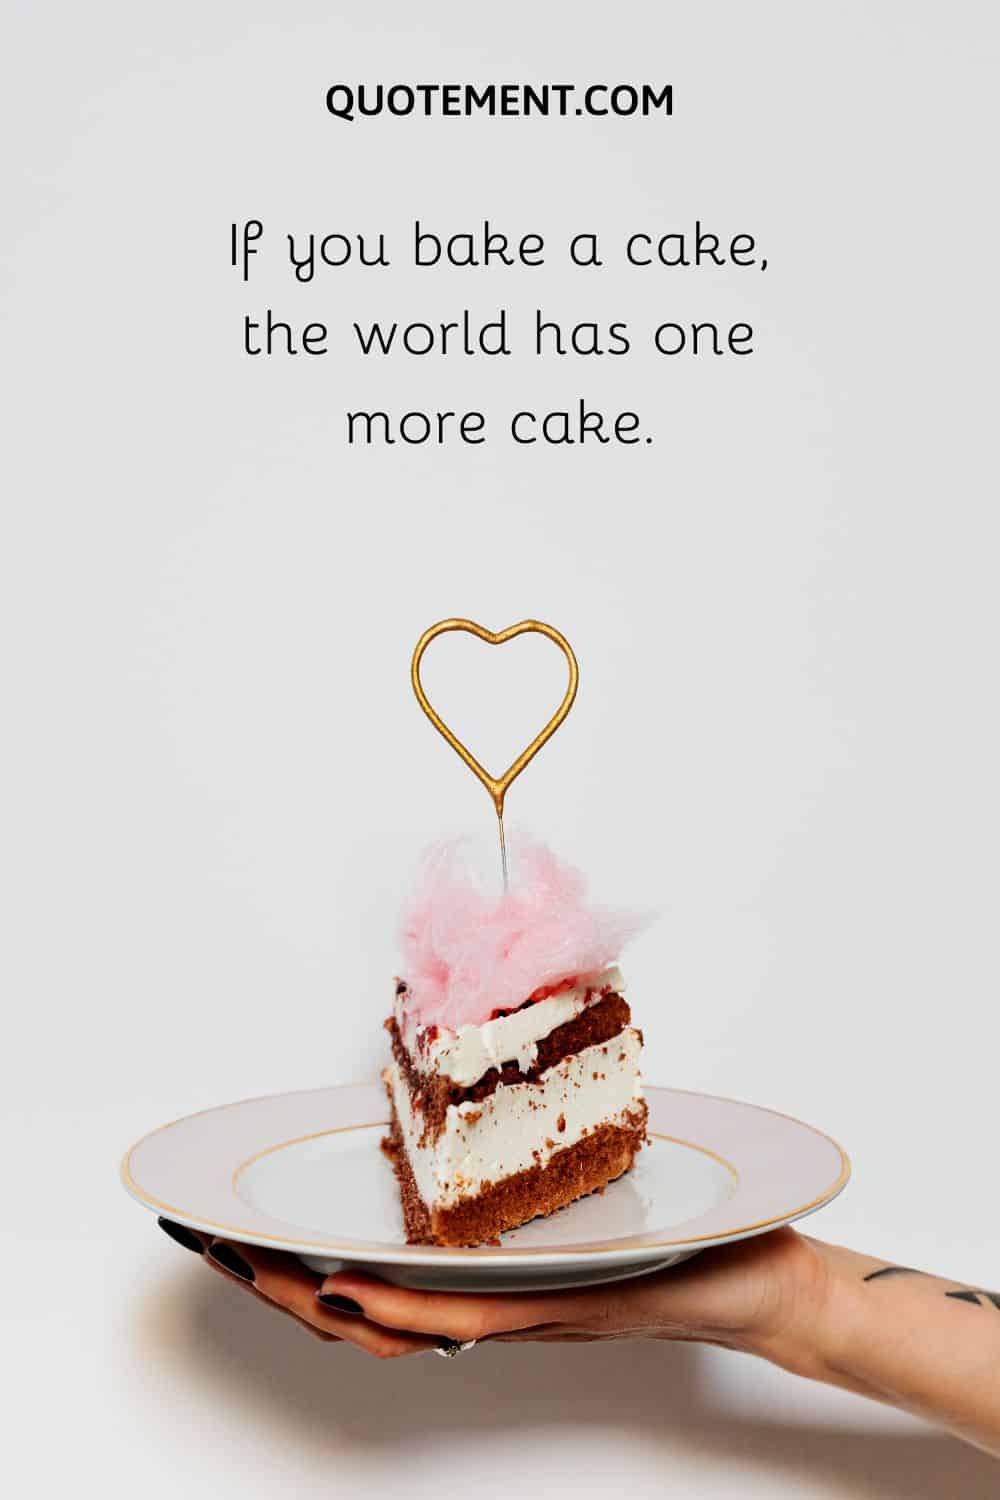 If you bake a cake, the world has one more cake